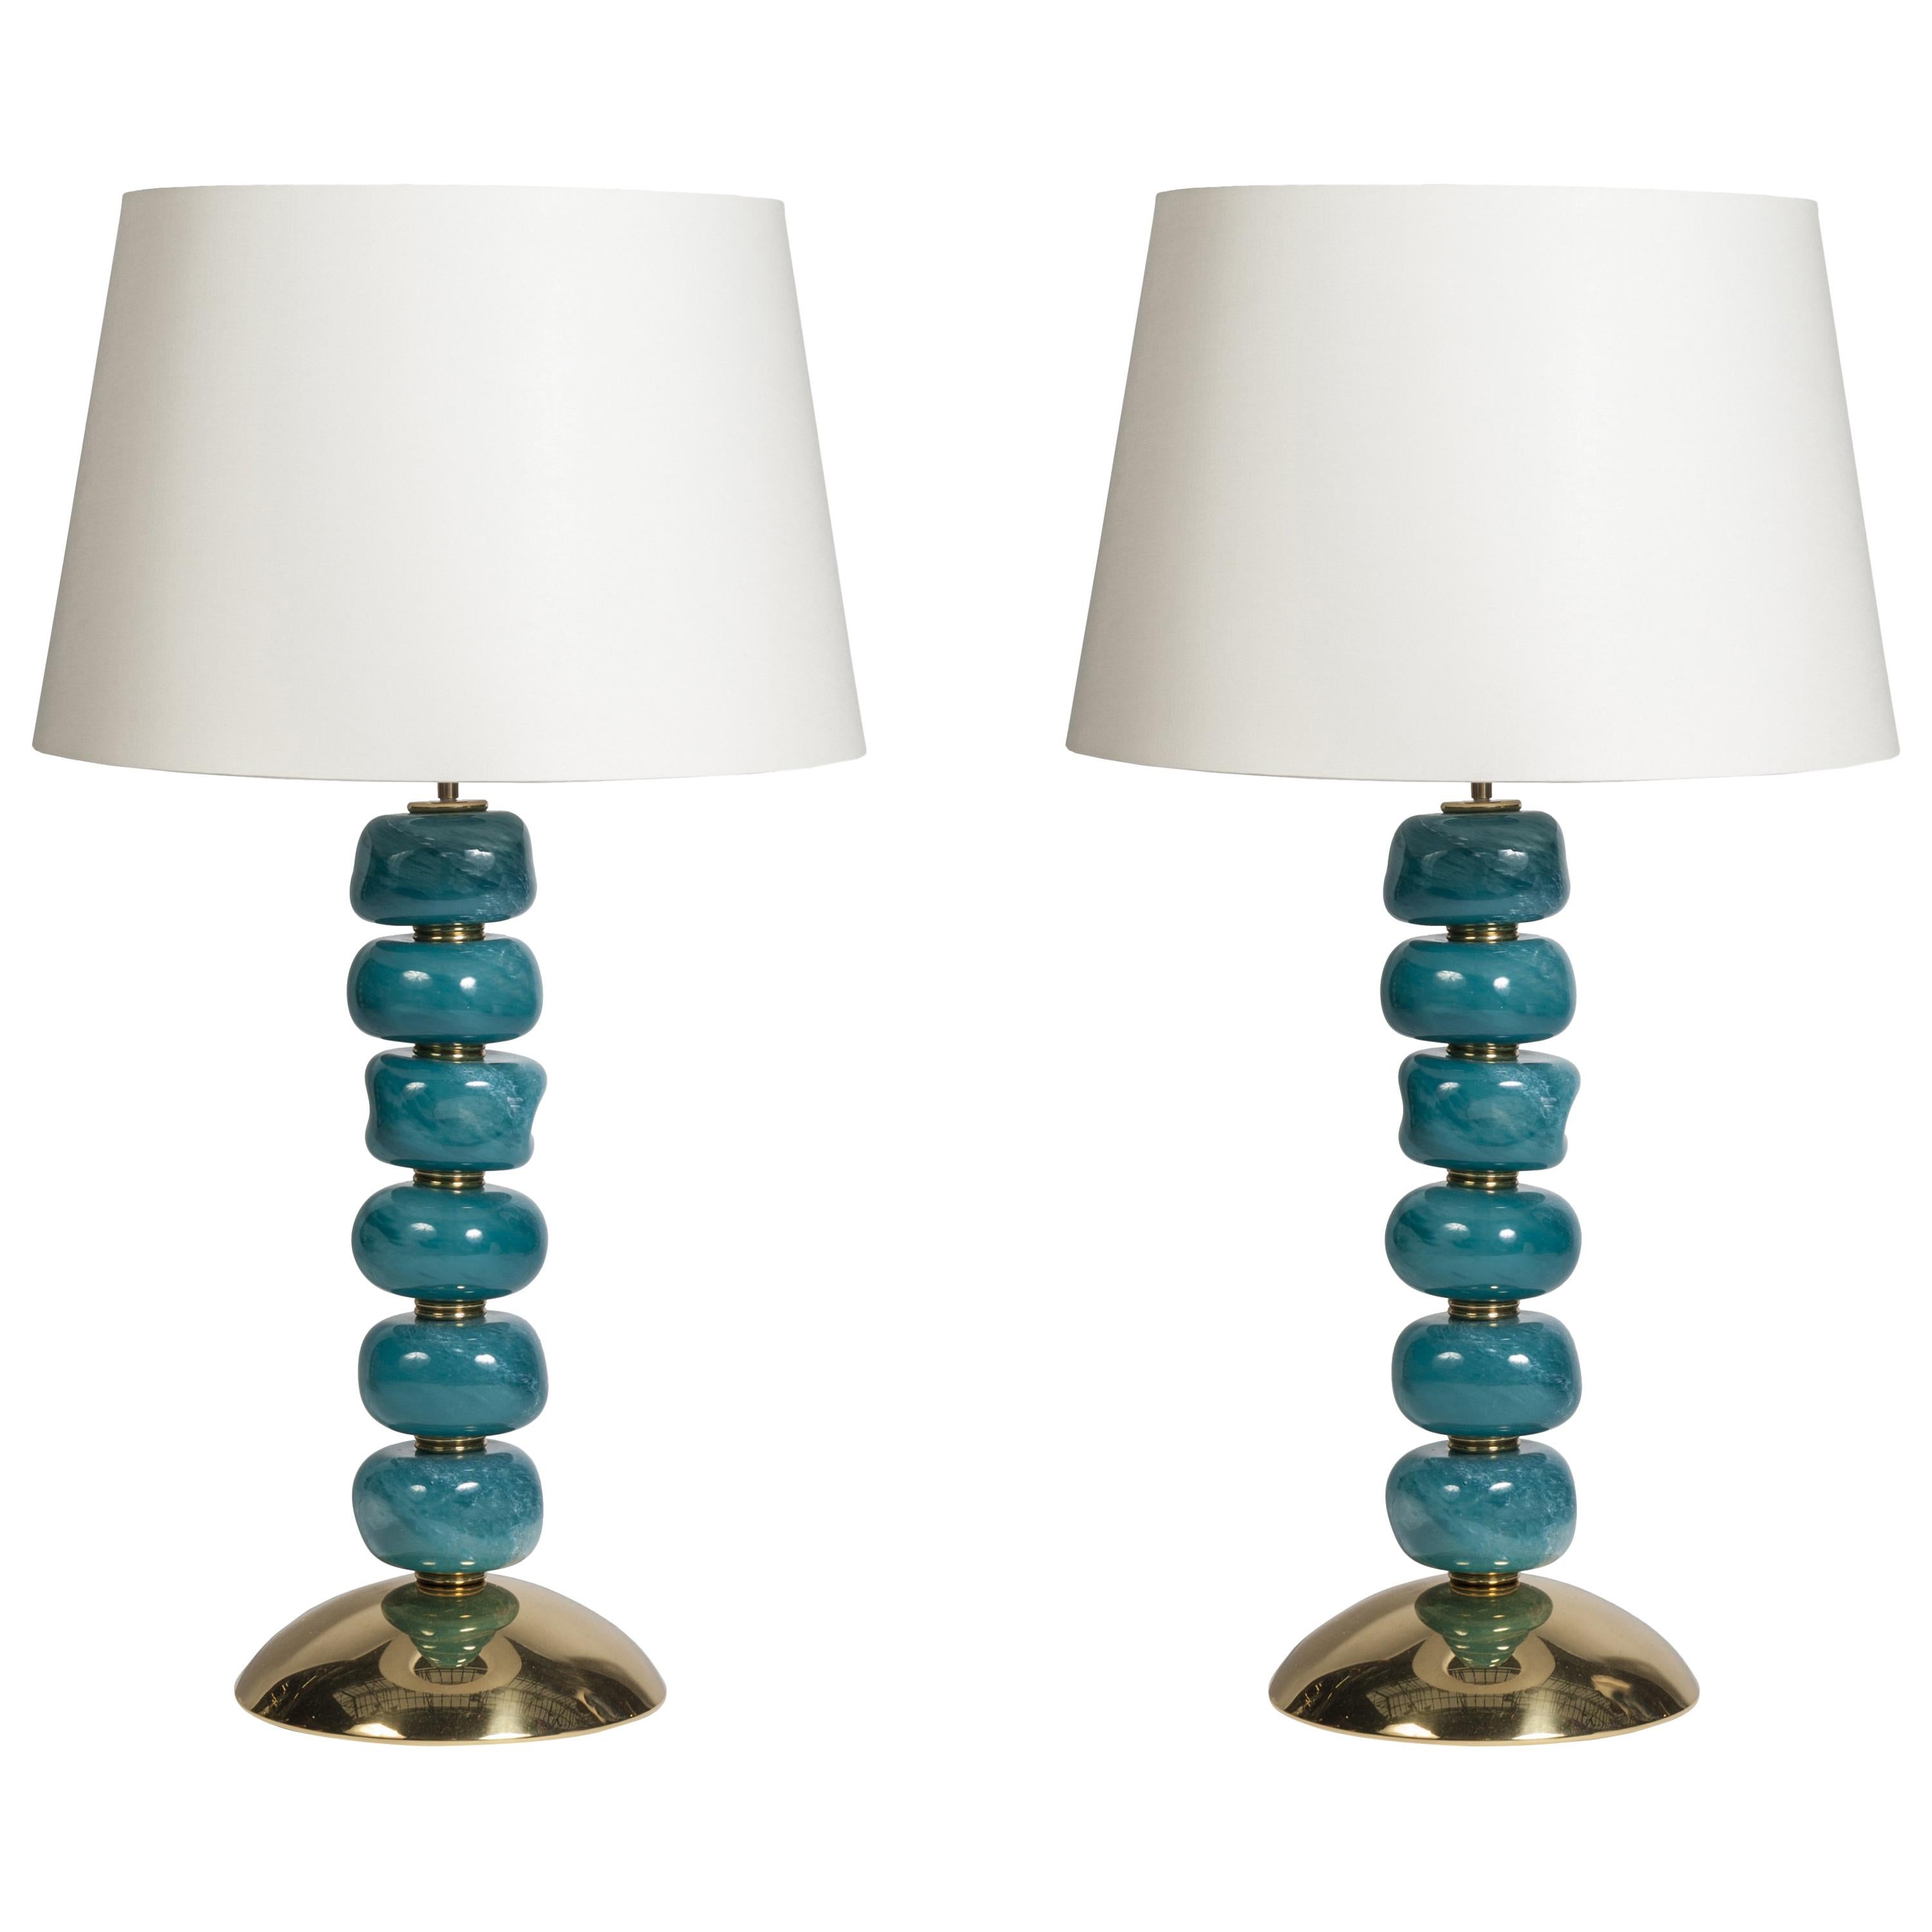 Pair of Murano Glass Lamps Attributed to Veronese